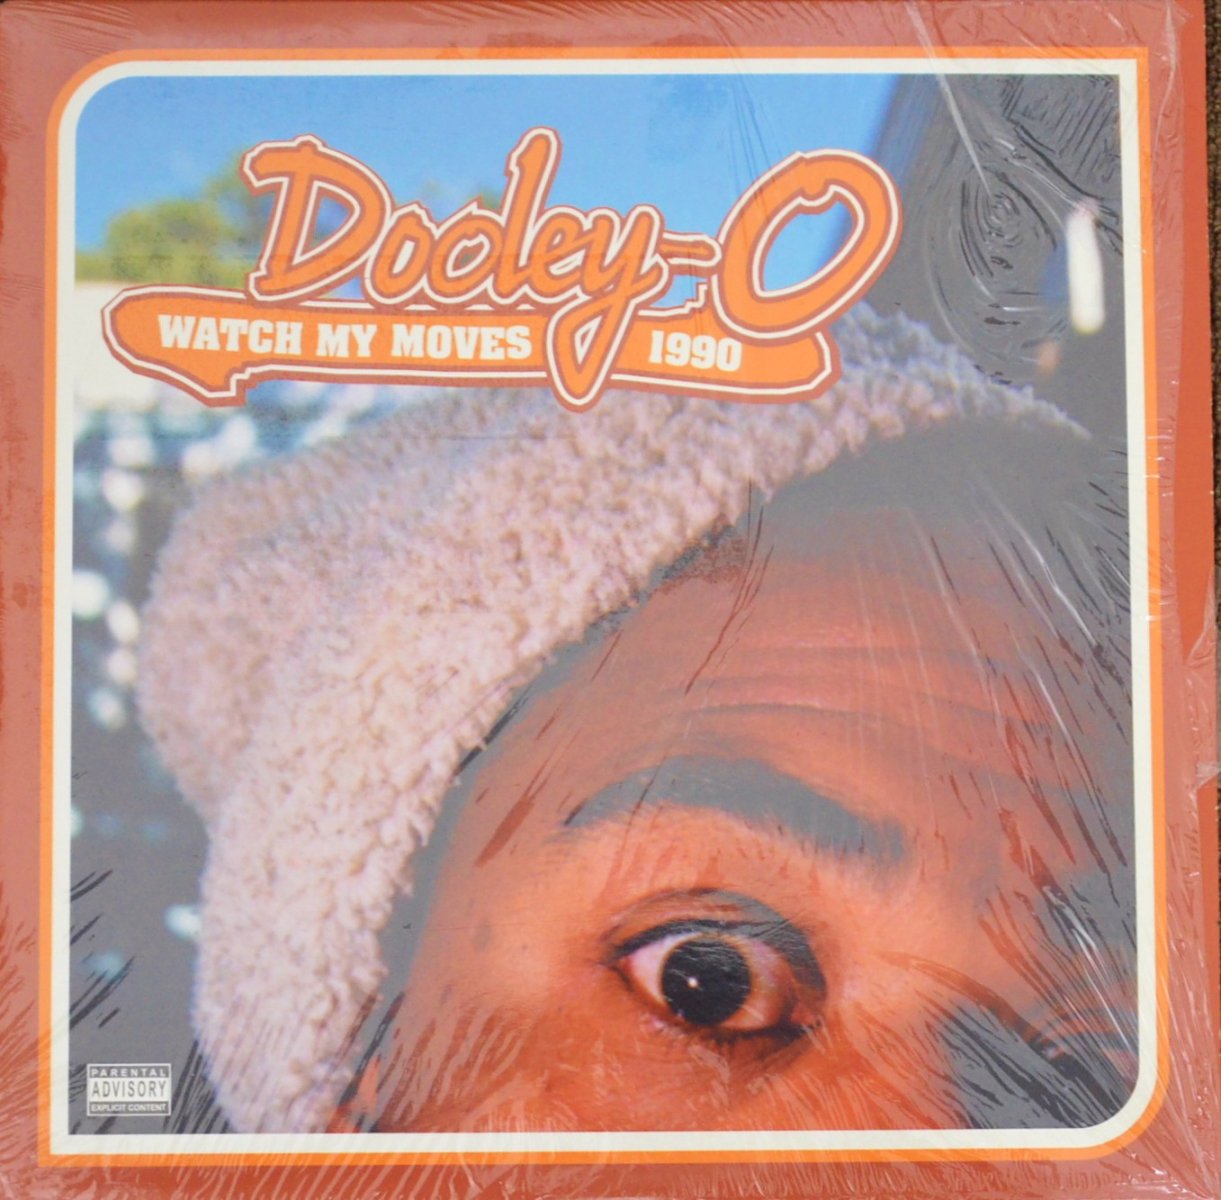 DOOLEY-O / WATCH MY MOVES 1990 (1LP)